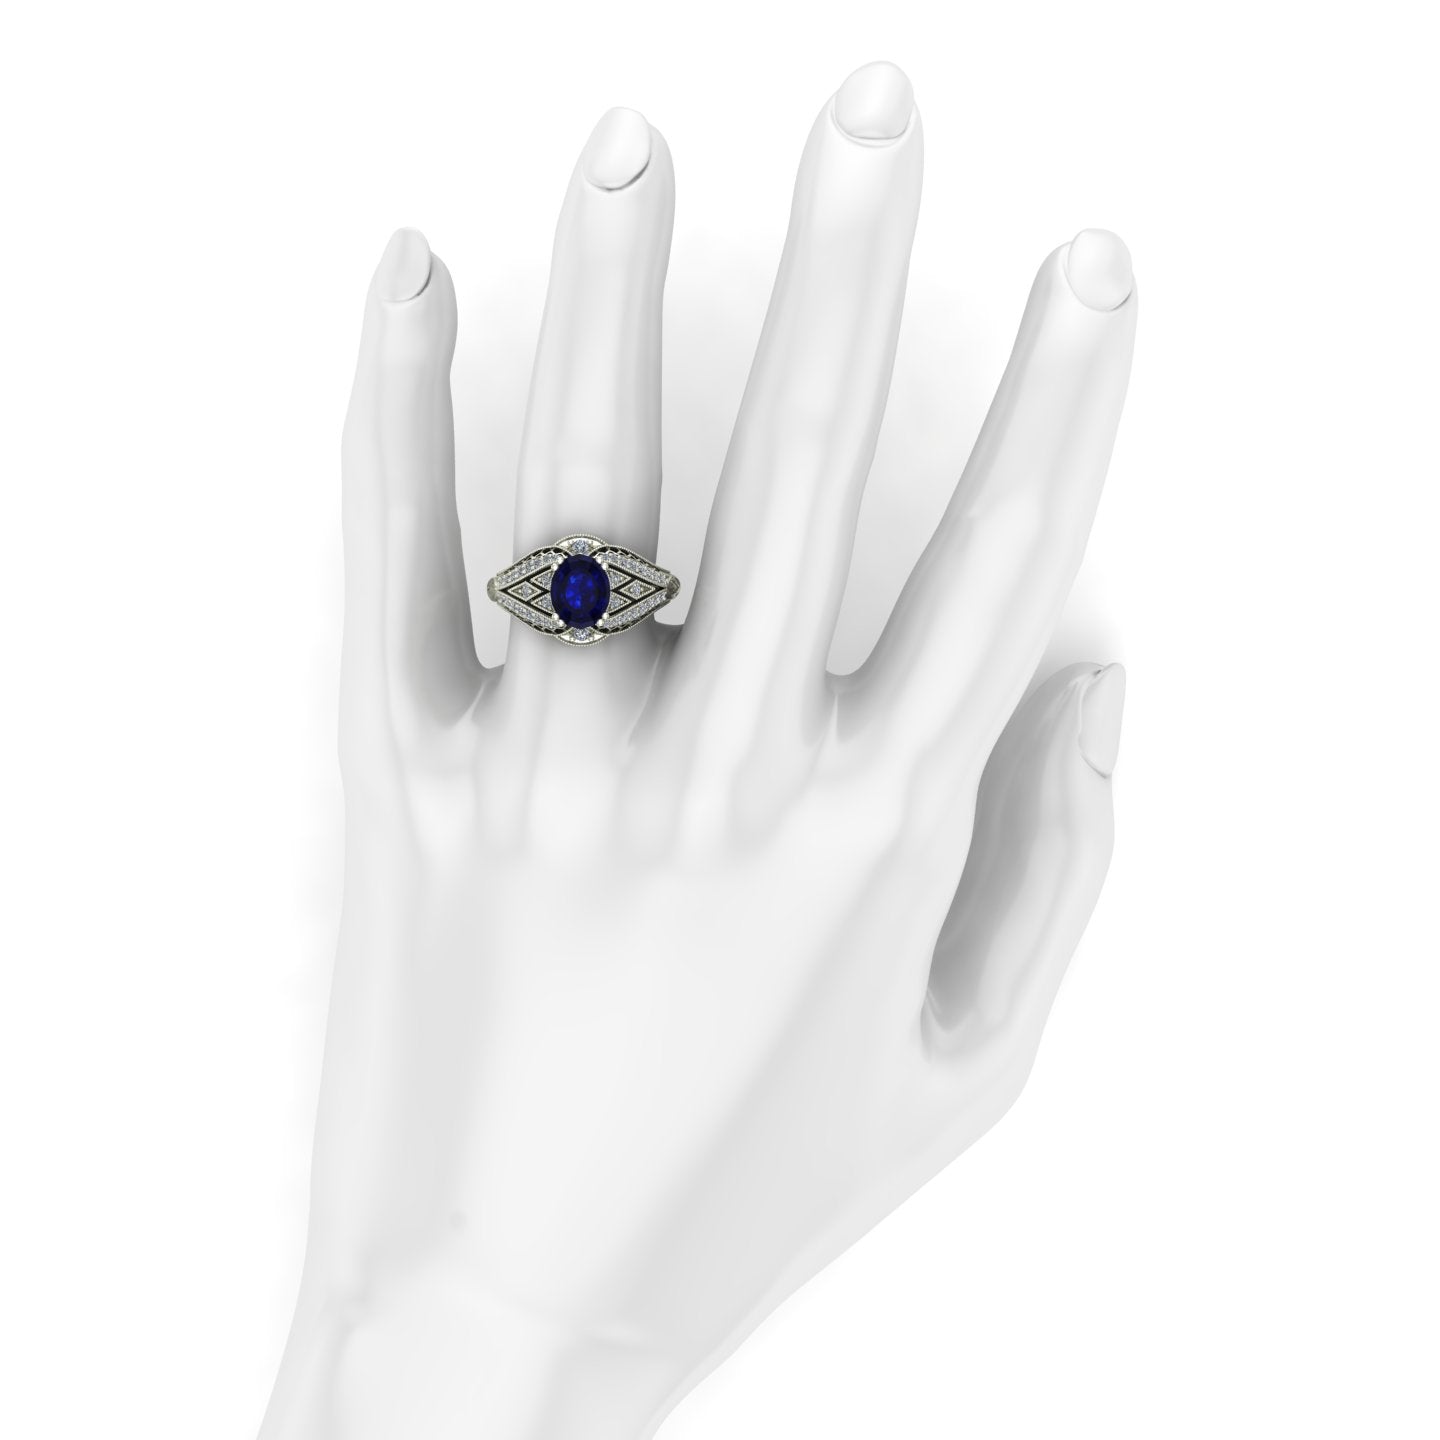 oval blue sapphire and diamond vintage inspired ring 14k white gold - Charles Babb Designs - on hand